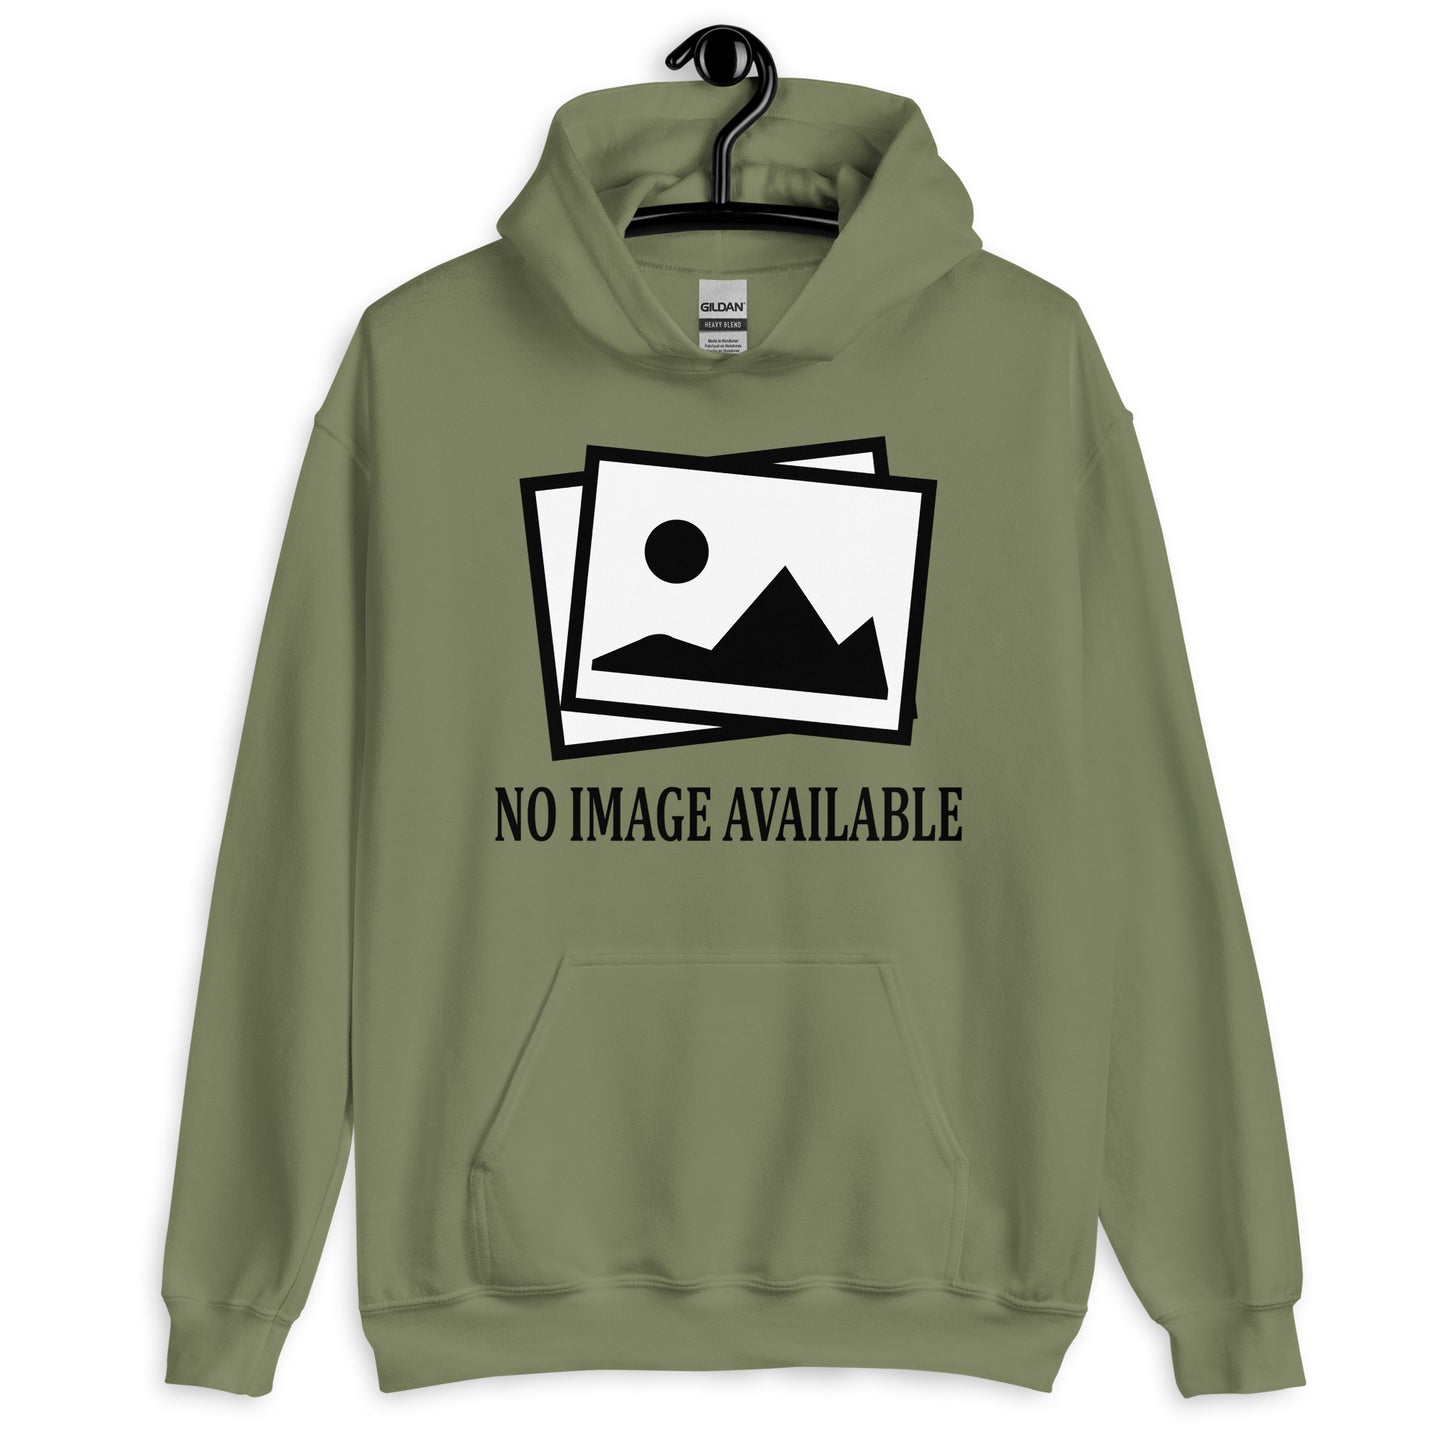 military green hoodie with image and text "no image available"